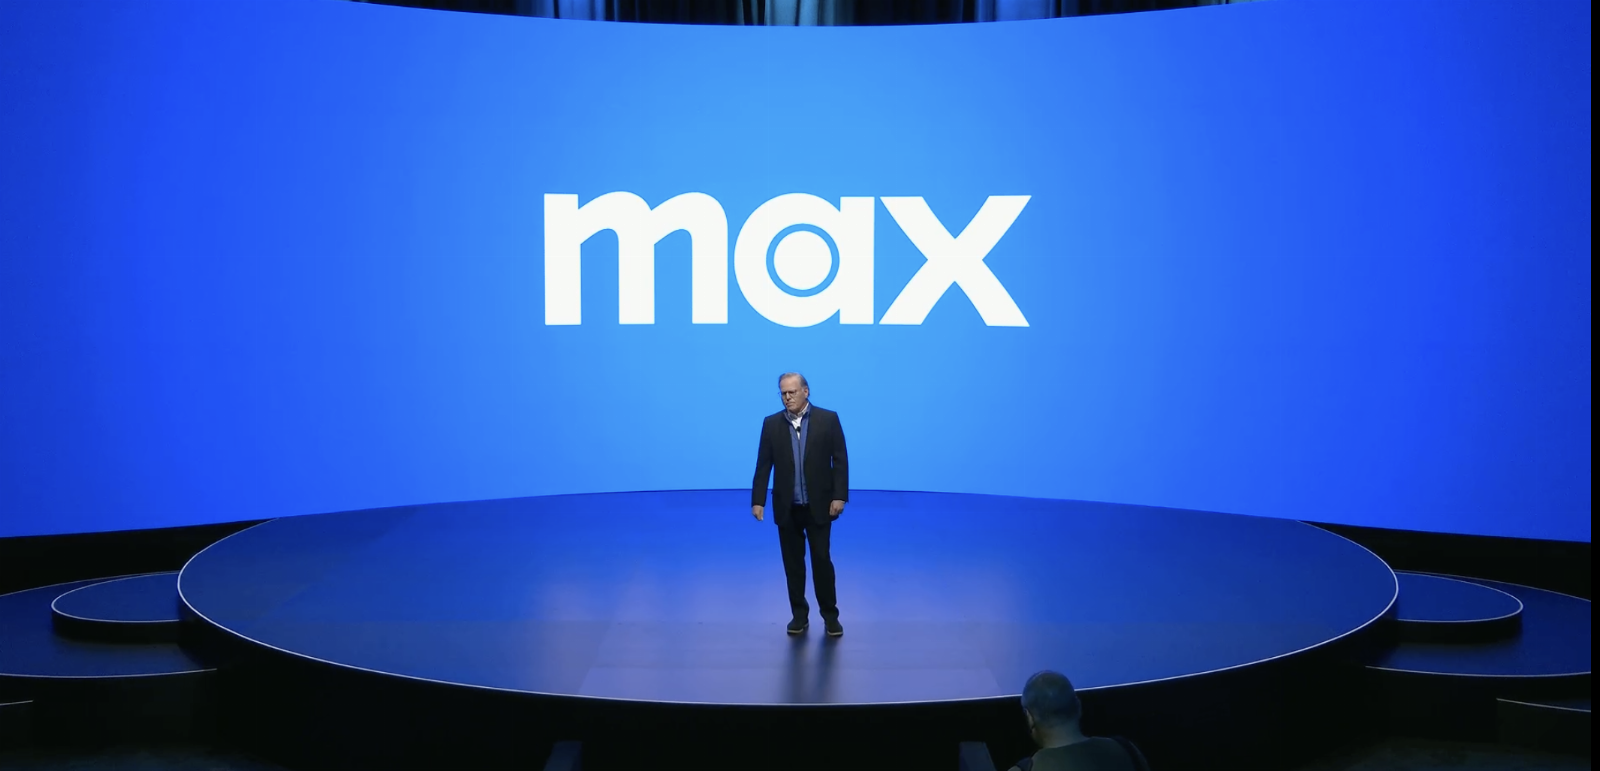 Warner Bros. Discovery to launch ‘Max’ service starting at $9.99/mo on May 23